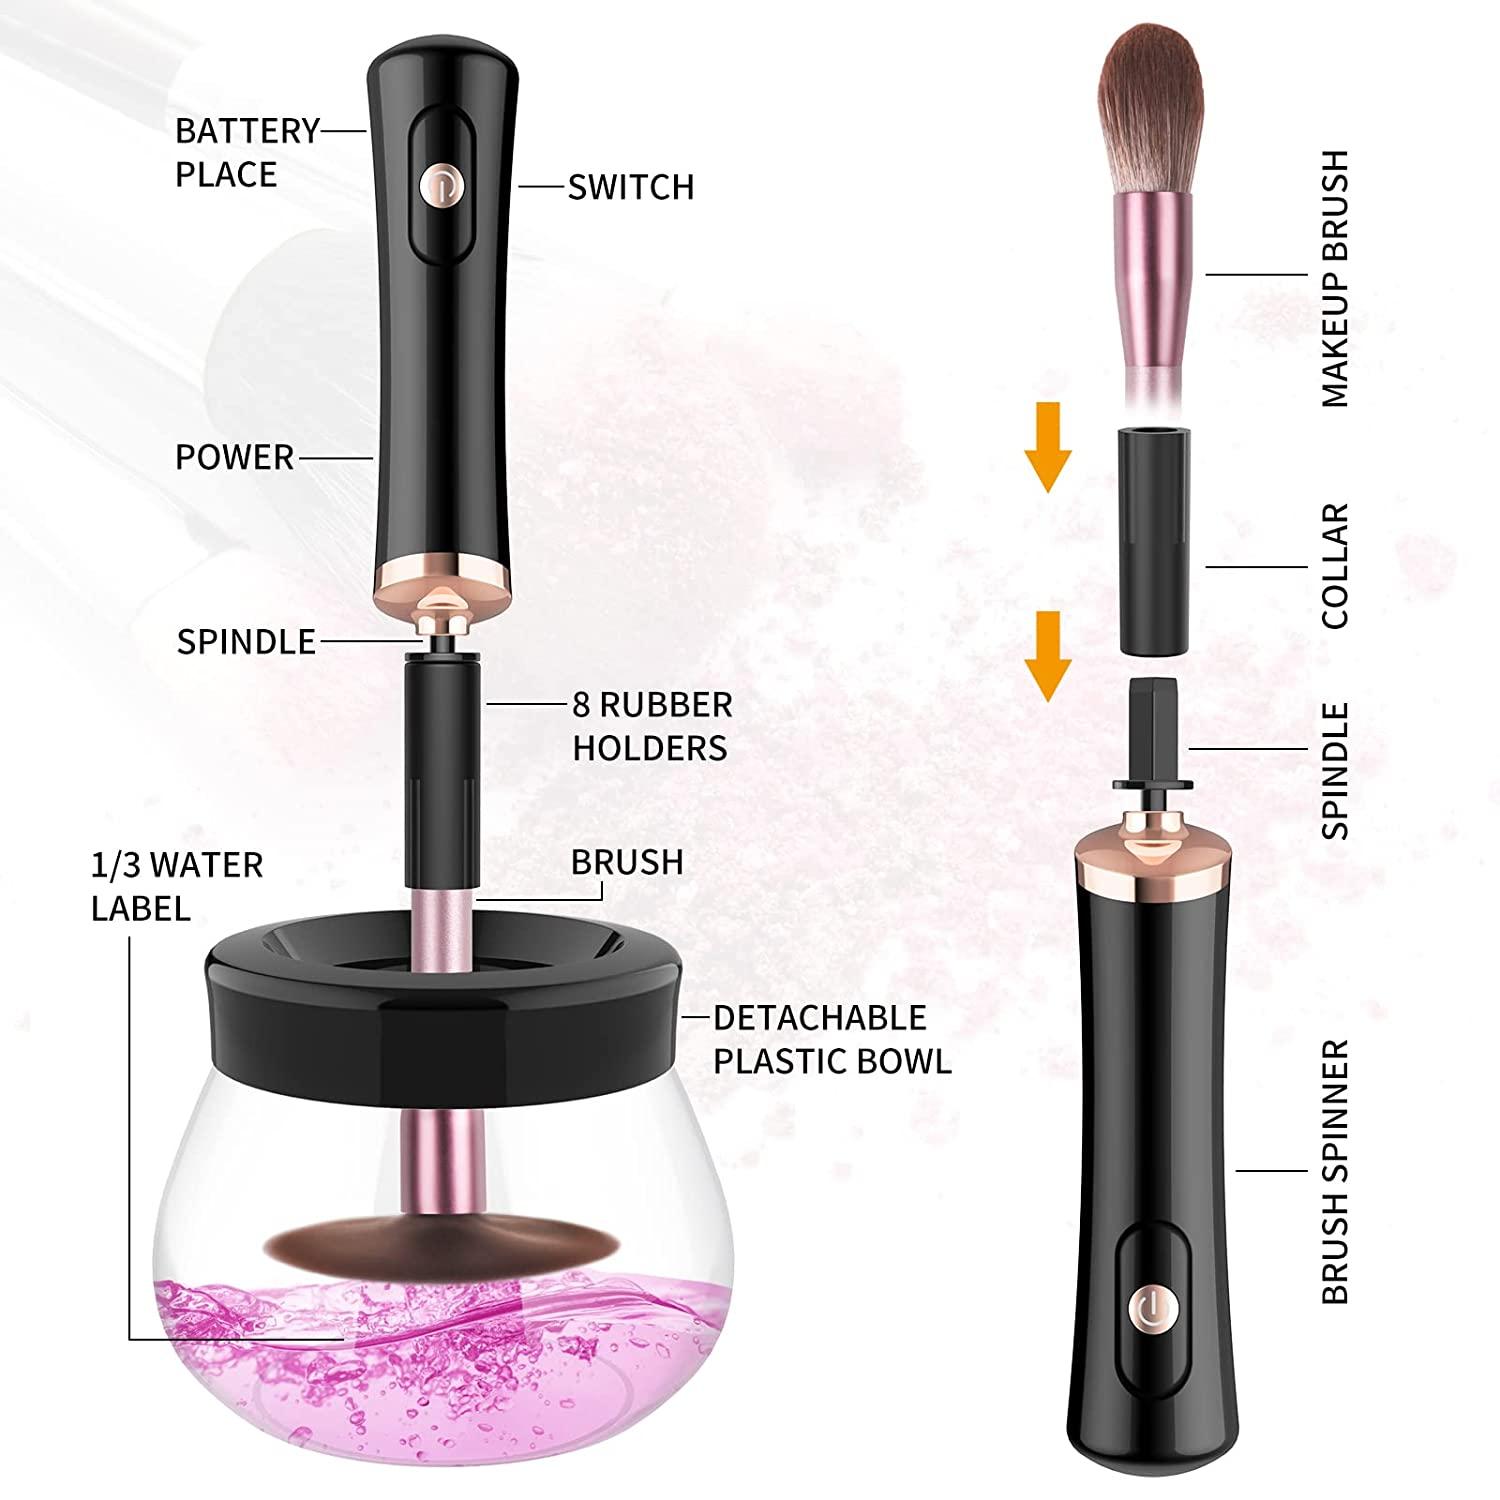  Senbowe Upgraded Makeup Brush Cleaner and Dryer Machine,  Electric Cosmetic Automatic Brush Spinner with 8 Size Rubber Collars, Wash  and Dry in Seconds, Deep Cosmetic Brush Spinner for All Size Brushes 